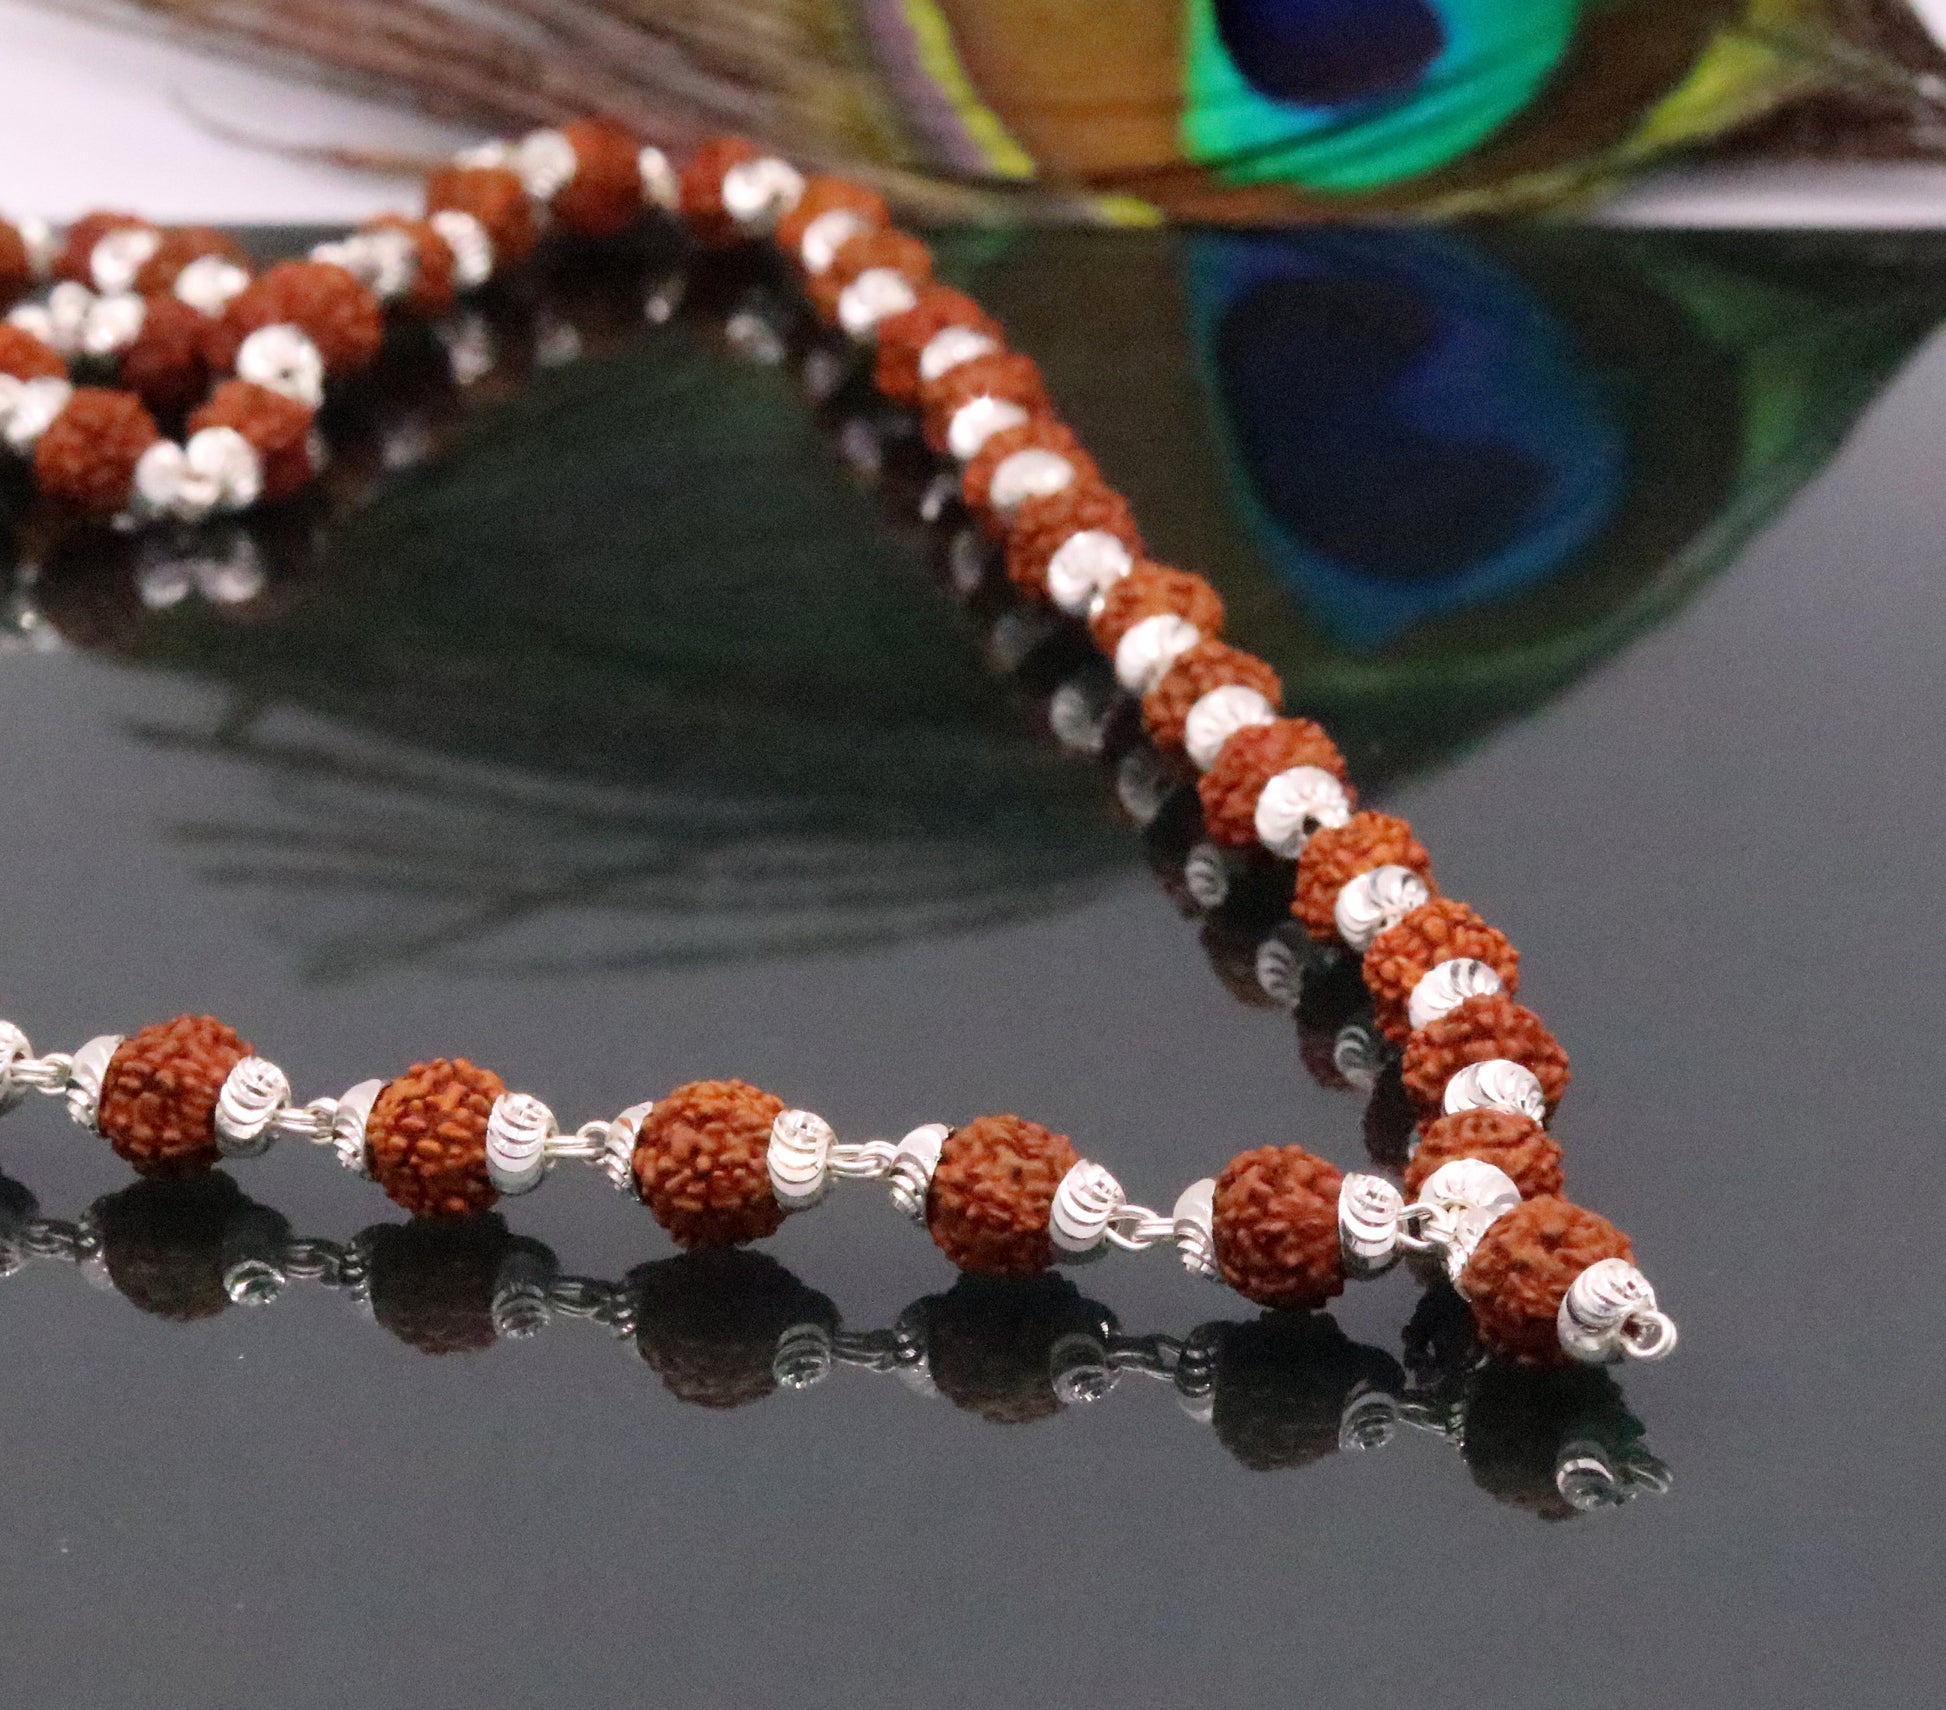 Handmade Sterling silver gorgeous natural rudraksh beads 26 inches long 54 beads japp mala necklace from rajasthan india ch38 - TRIBAL ORNAMENTS